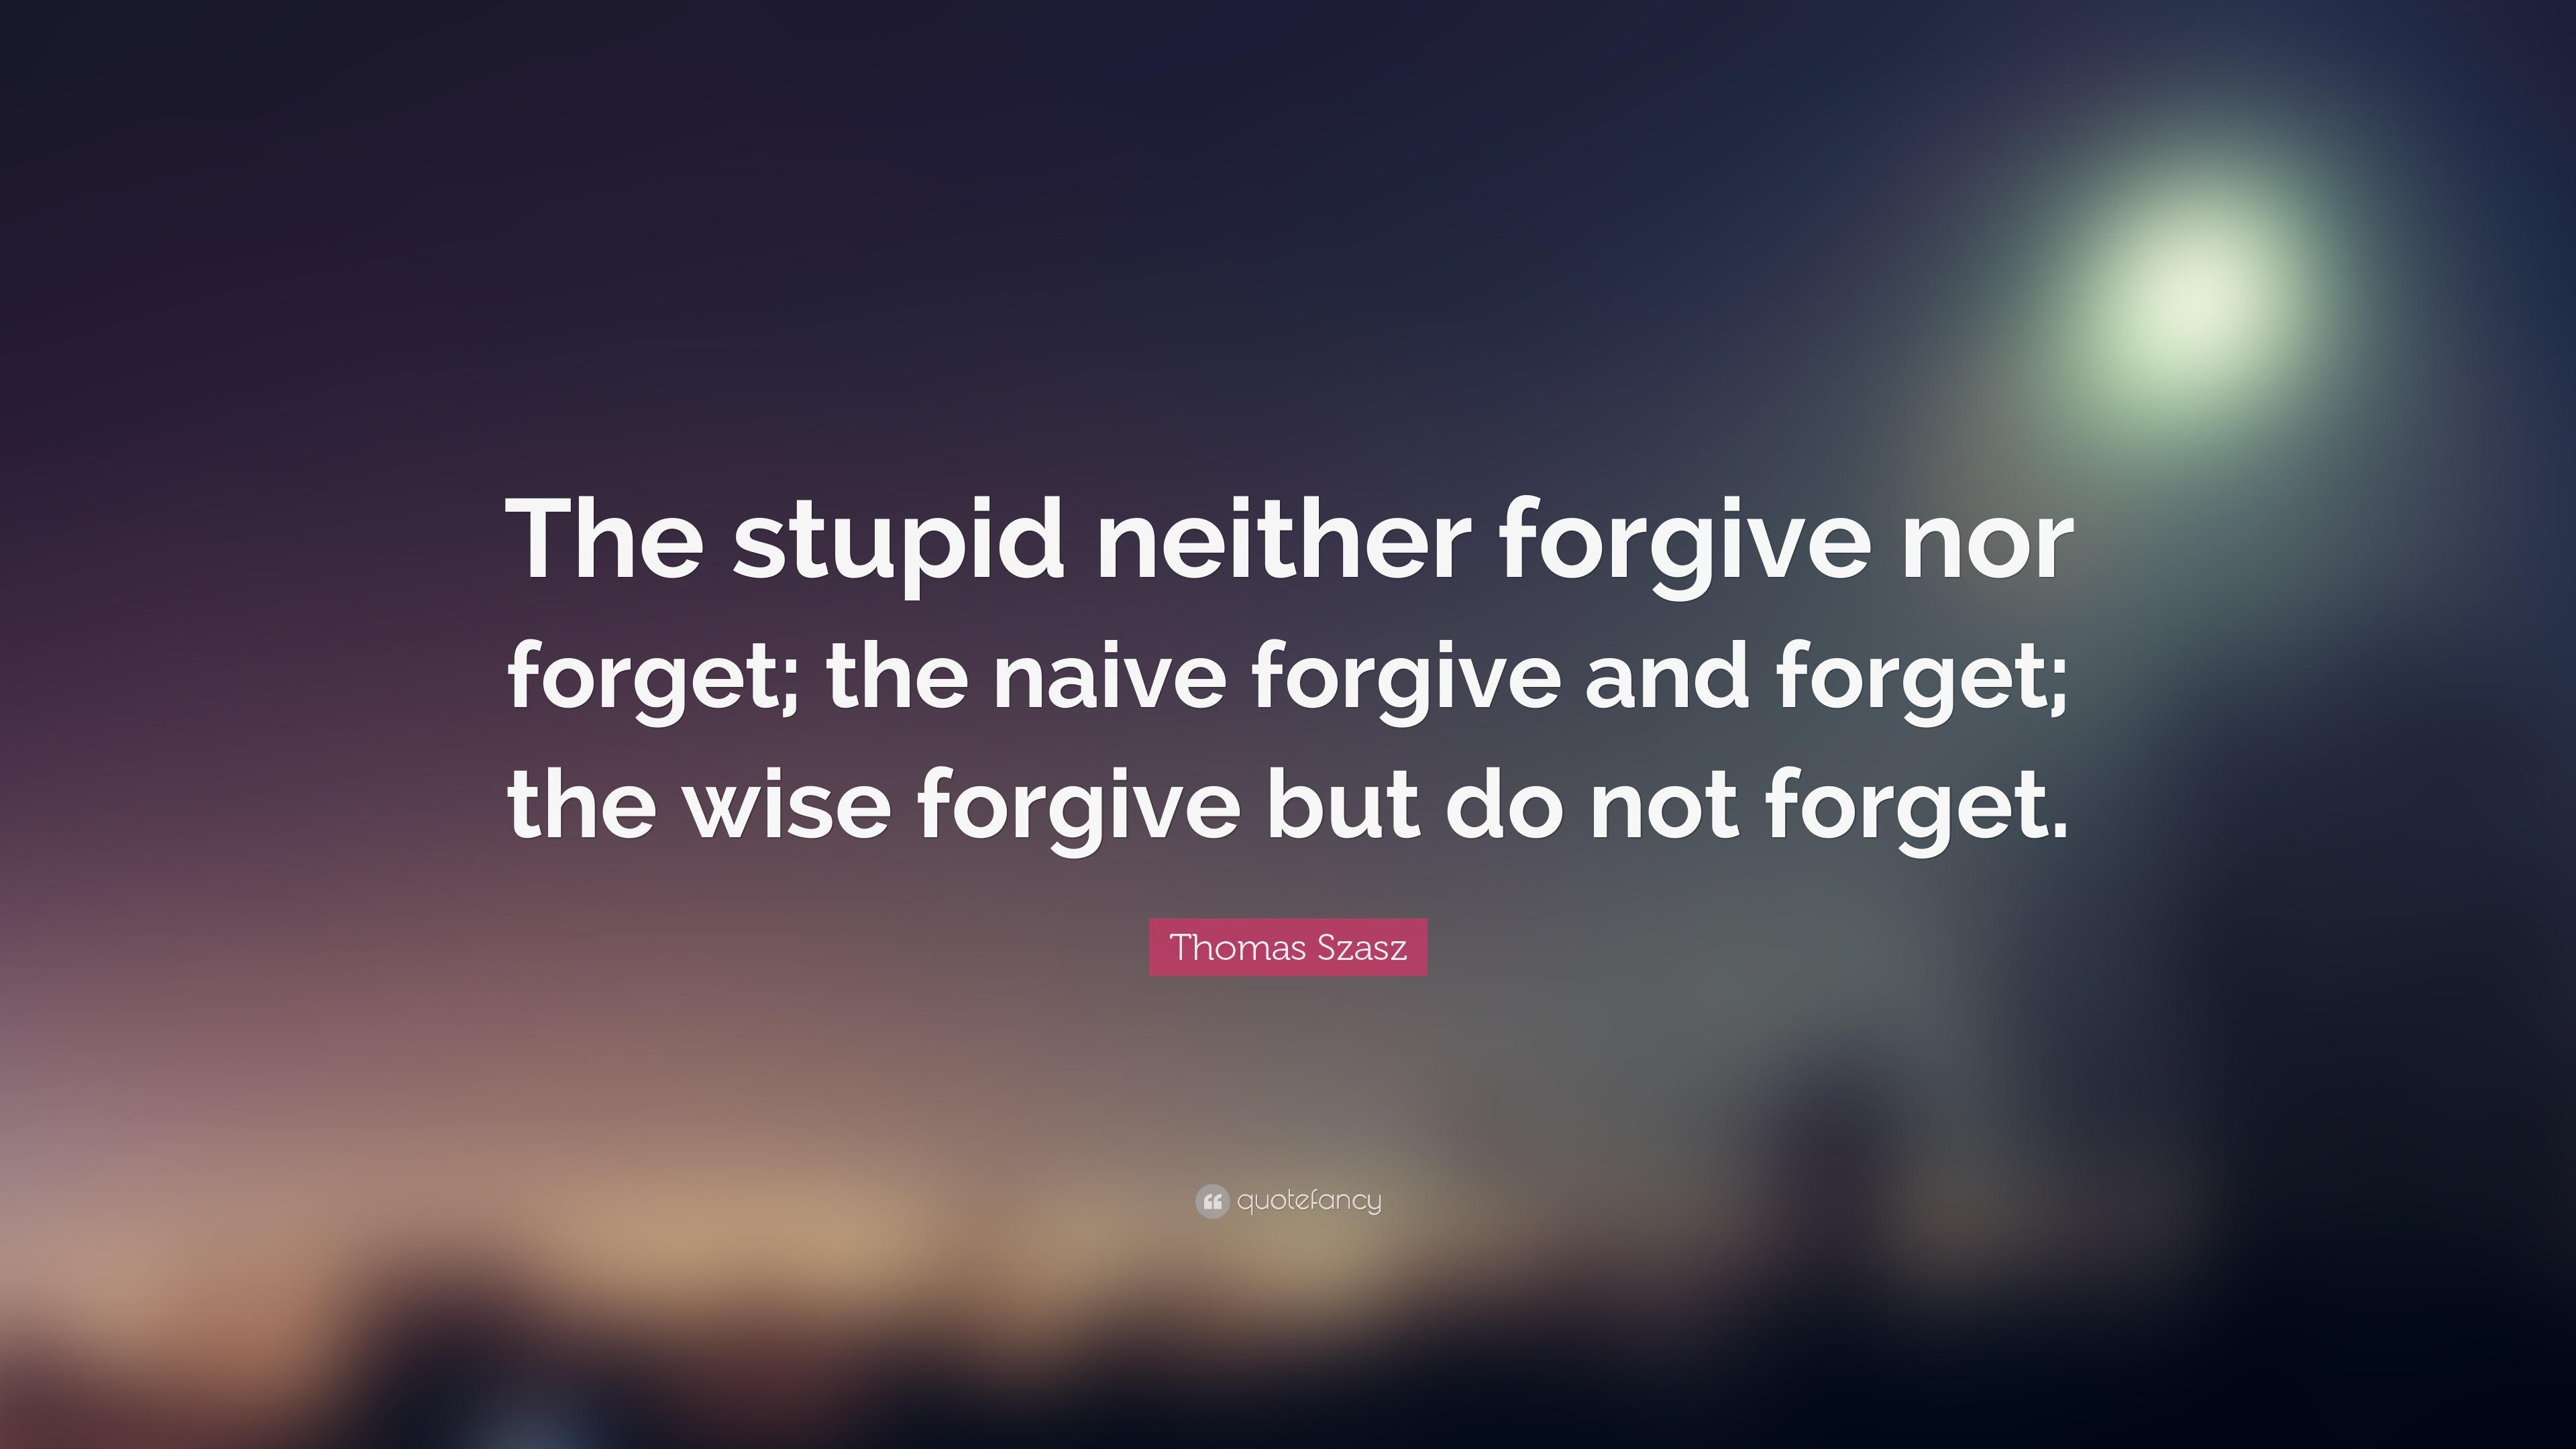 Thomas Stephen Szasz Quote: “The stupid neither forgive nor forget; the